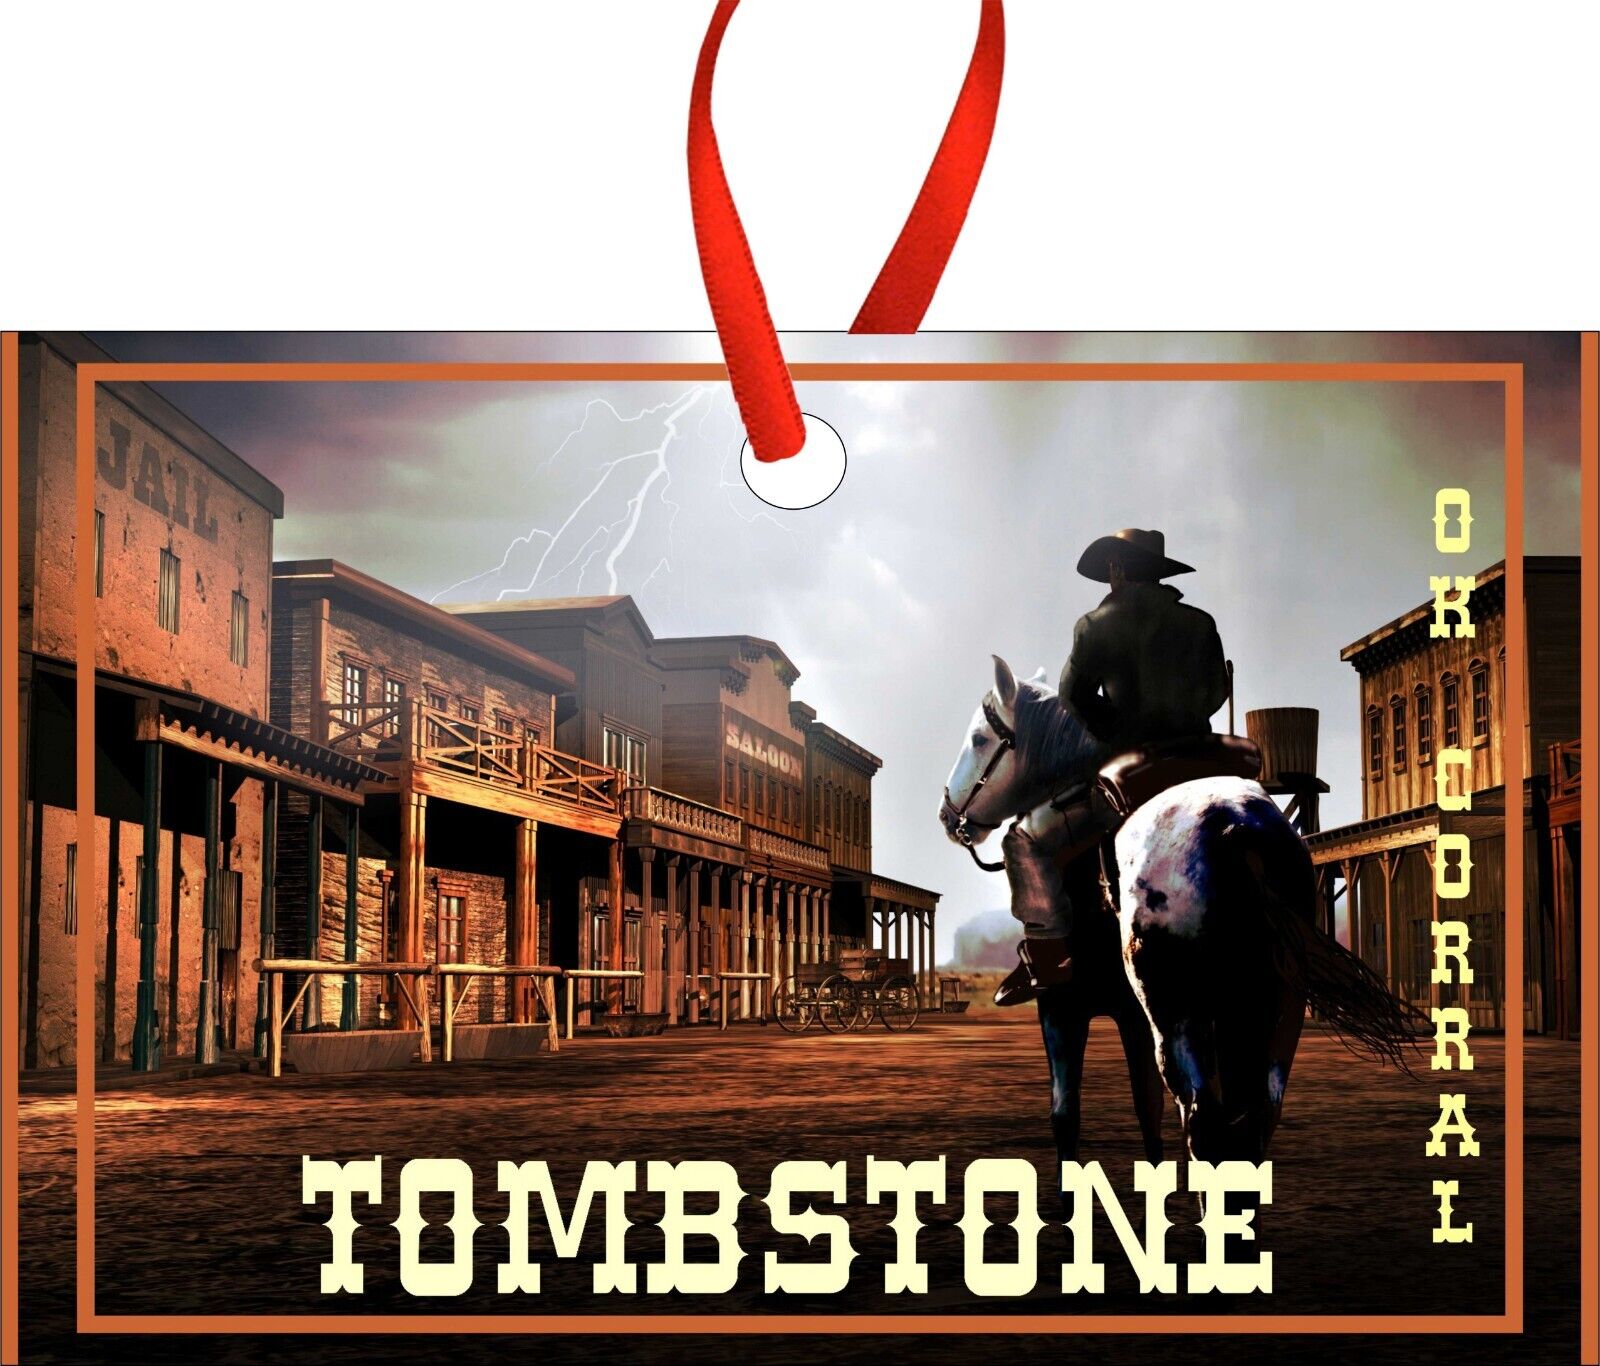 Tombstone Cowboy Art Christmas & Holiday Ornament TRAVEL POSTER ART